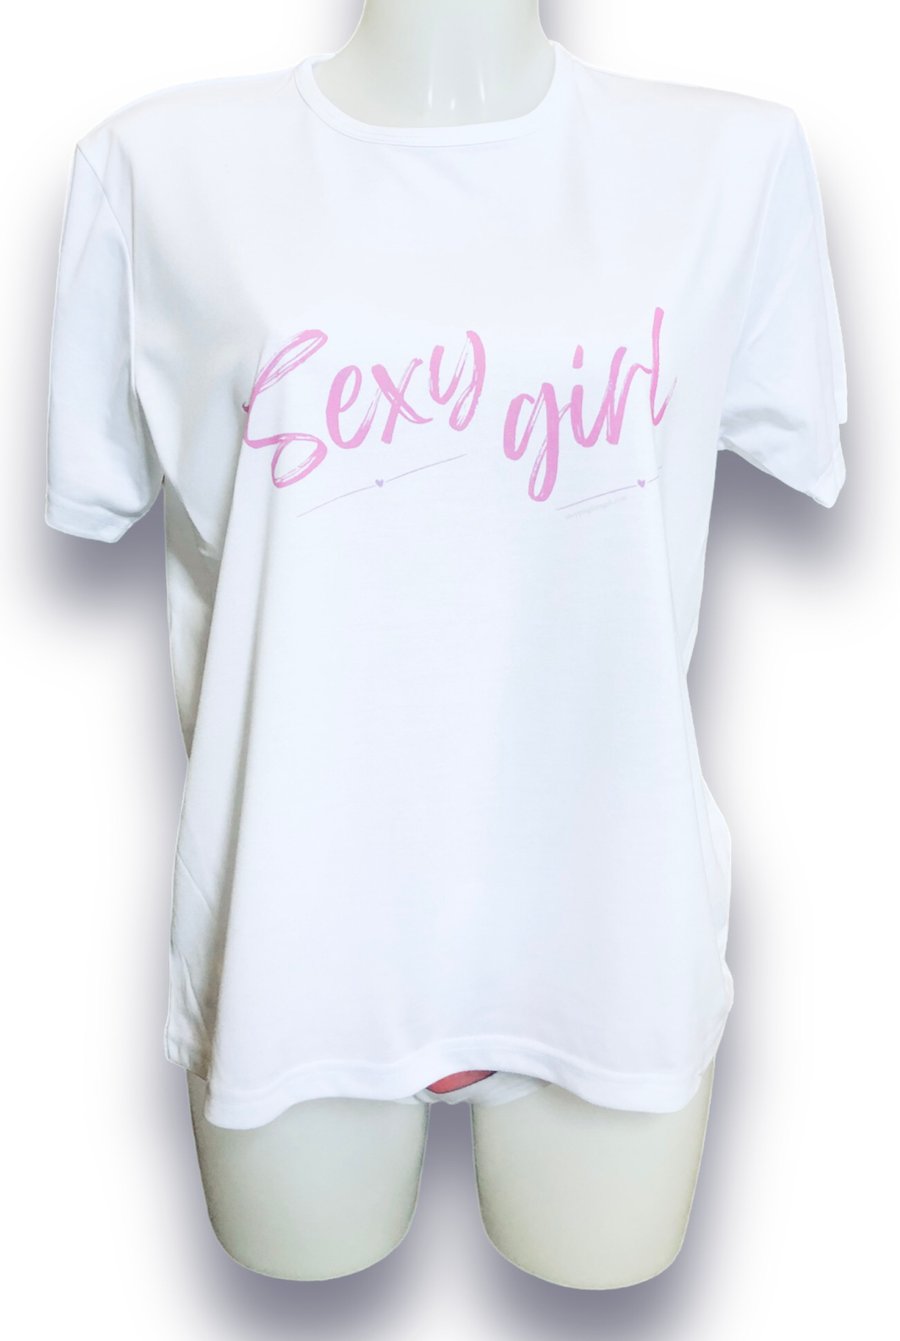 Womens T-Shirt. Sexy Girl. T- Shirts for girls for Birthdays, Christmas gifts